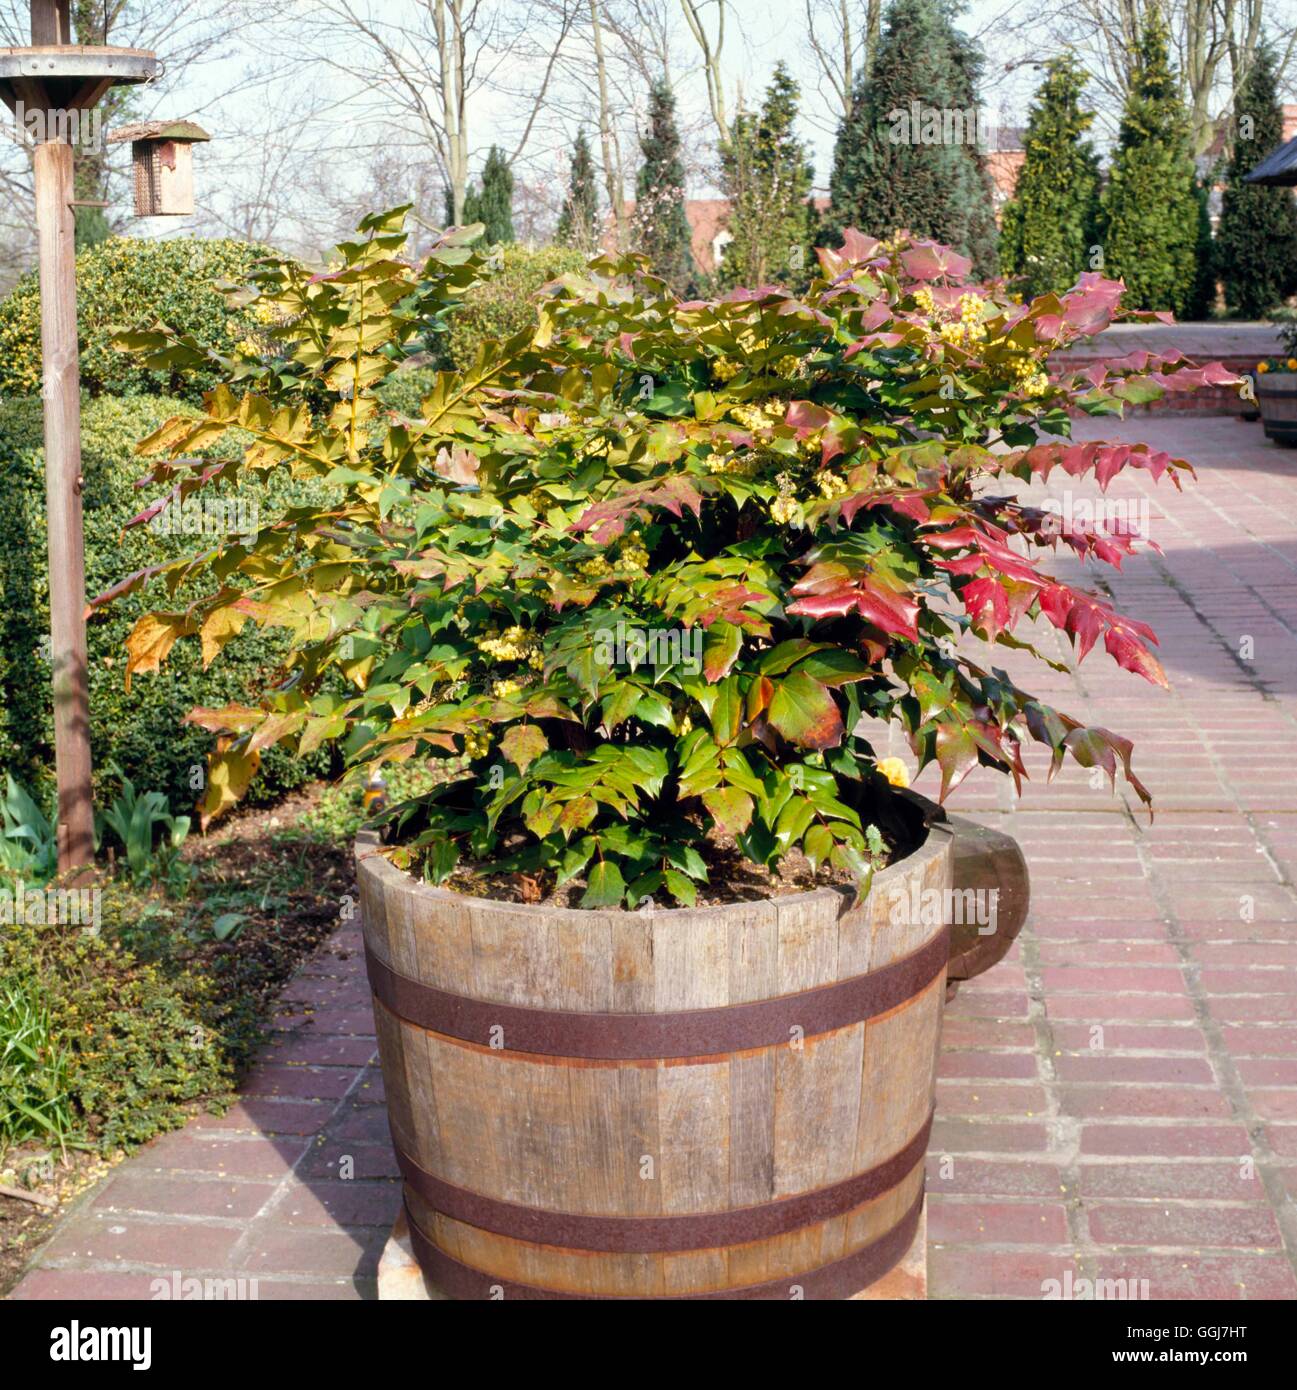 Container - Shrub - of Mahonia showing Winter colour   CTR021526 Stock Photo